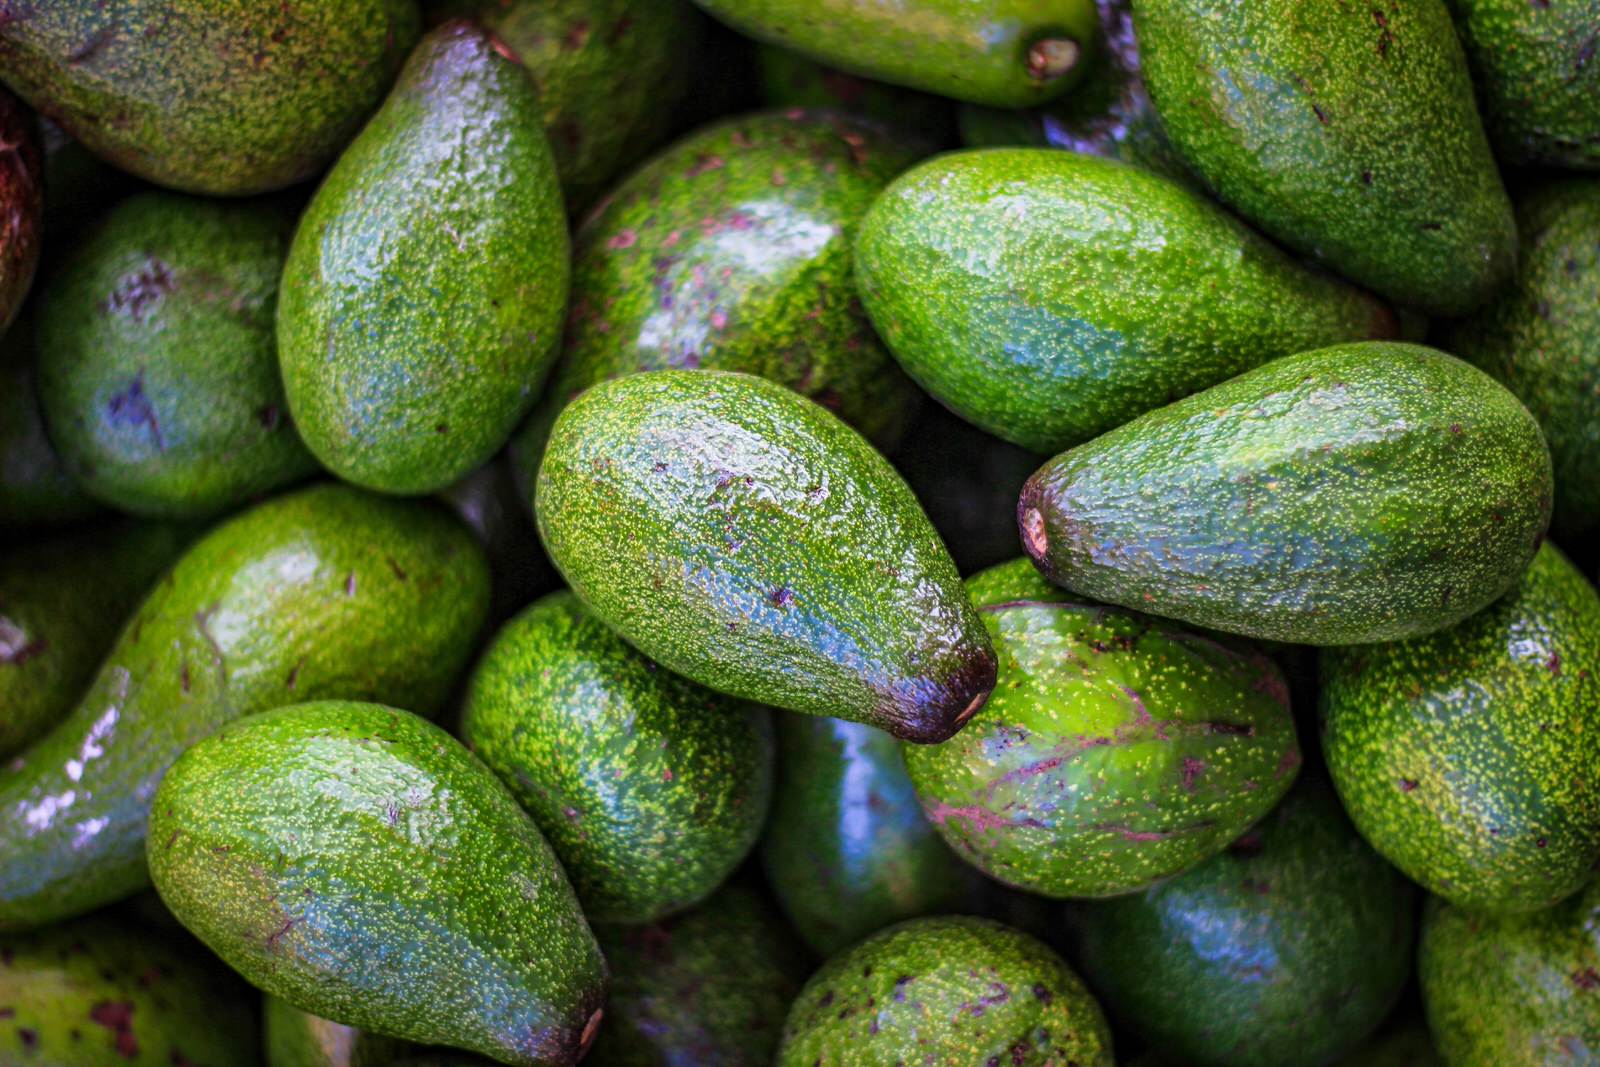 Discover the fascinating world of Kenyan avocados and how they have become one of the top exports in the country. This blog post takes you on a journey through the history of avocado farming in Kenya, the sustainable practices employed by small-scale farmers, and the health benefits of consuming this delicious fruit. You'll also learn about the thriving avocado export market in Kenya and how this has helped to create sustainable livelihoods for farmers while meeting the high demand for avocados on the global market. Whether you're a fan of avocados or simply interested in sustainable agriculture, this blog post is a must-read.